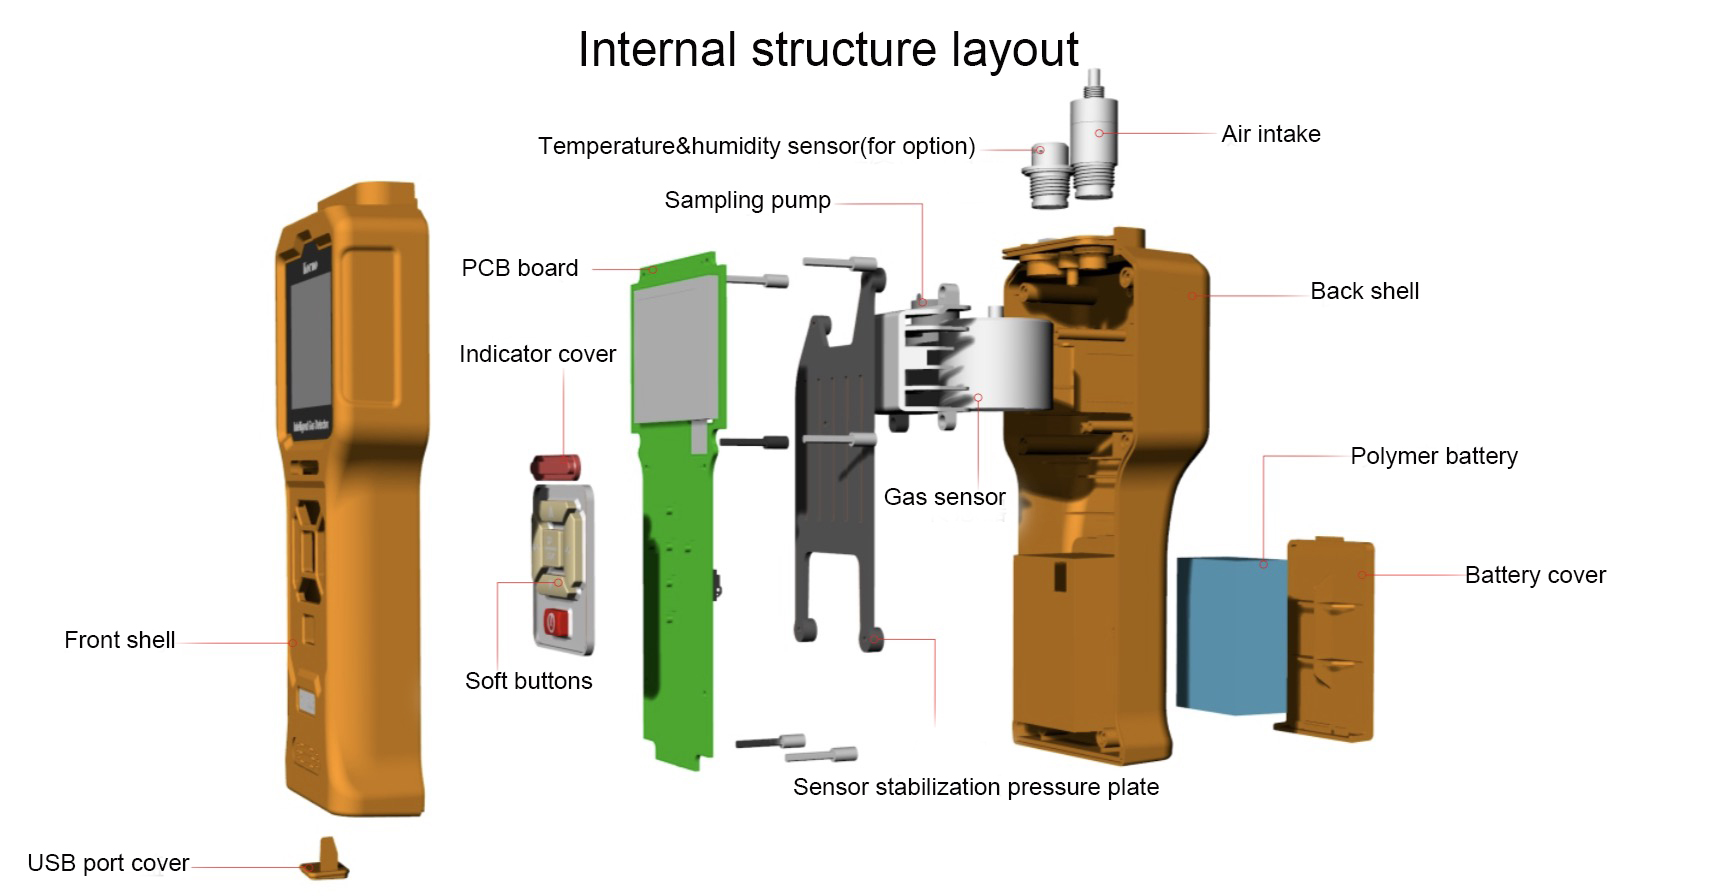 Internal structure layout